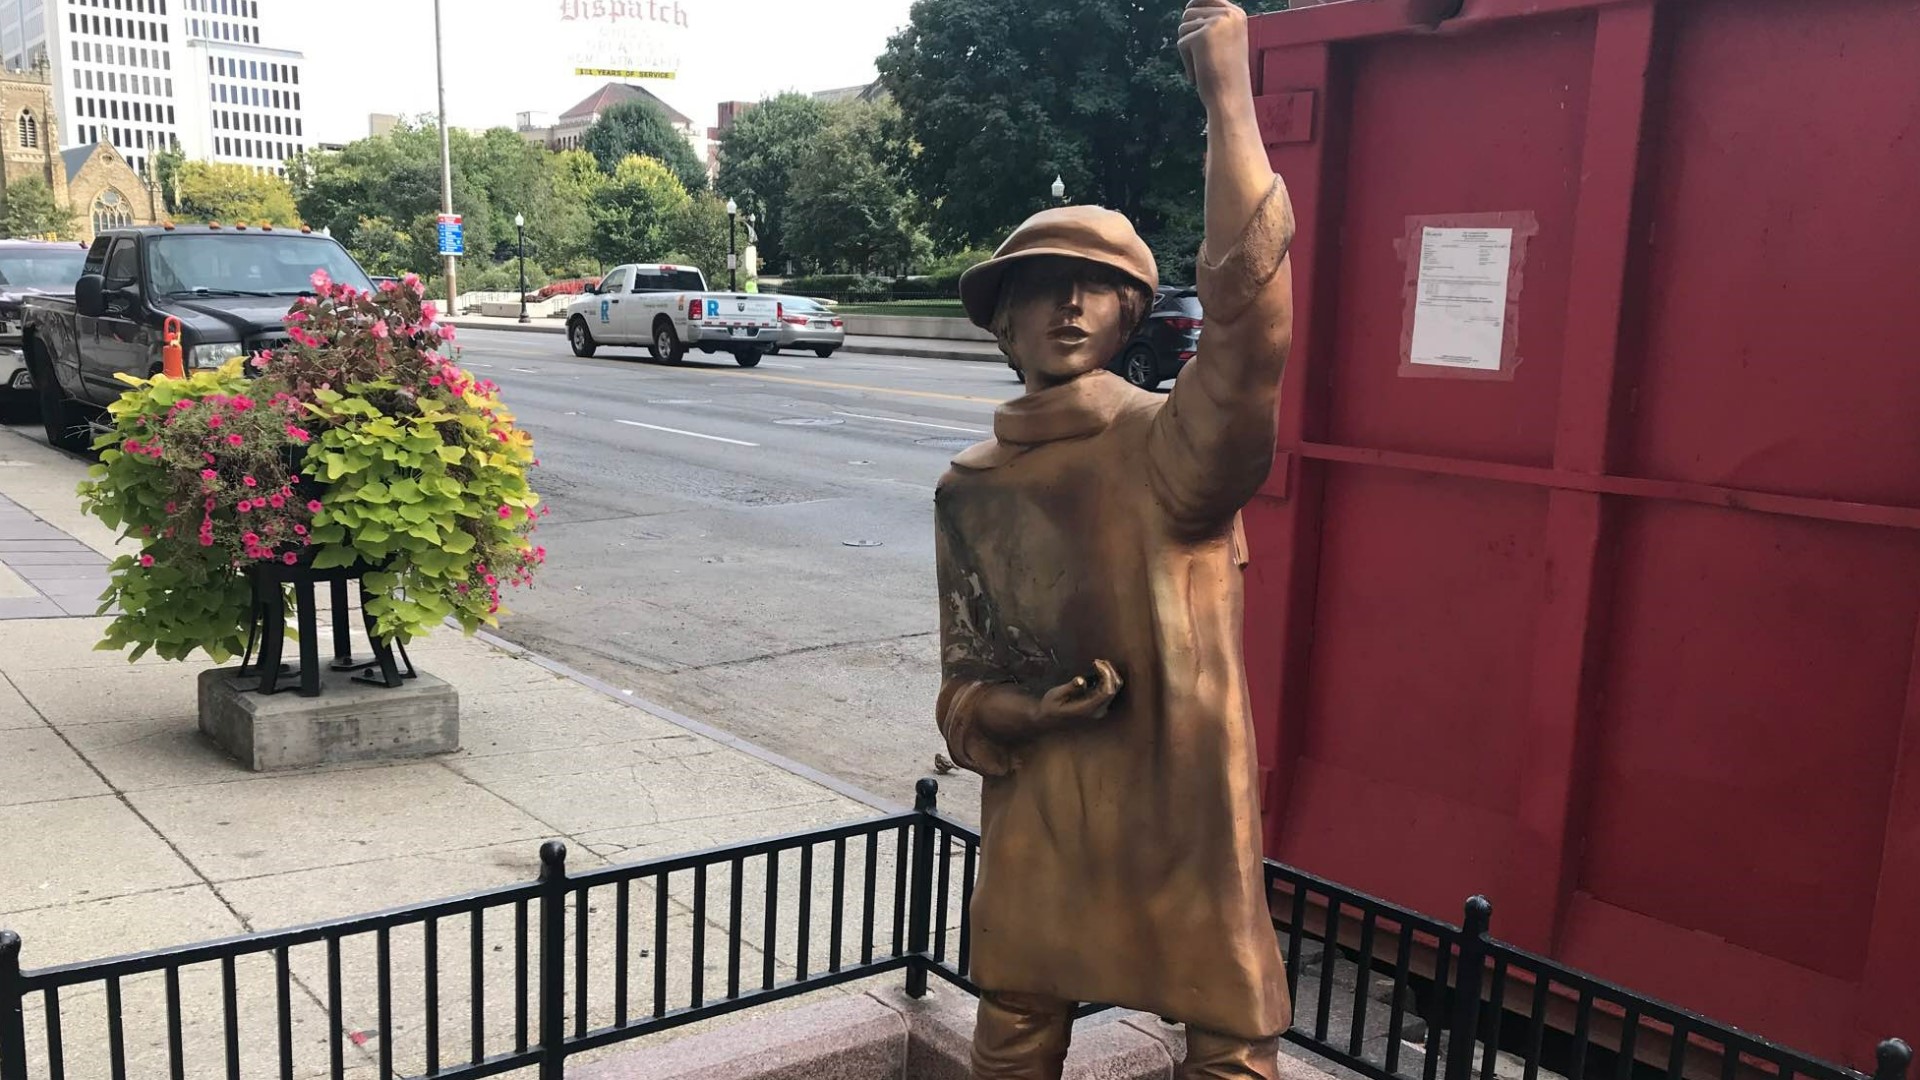 The statue was dedicated in 2018 to honor the organization, which has been providing clothing to those in need since 1907.